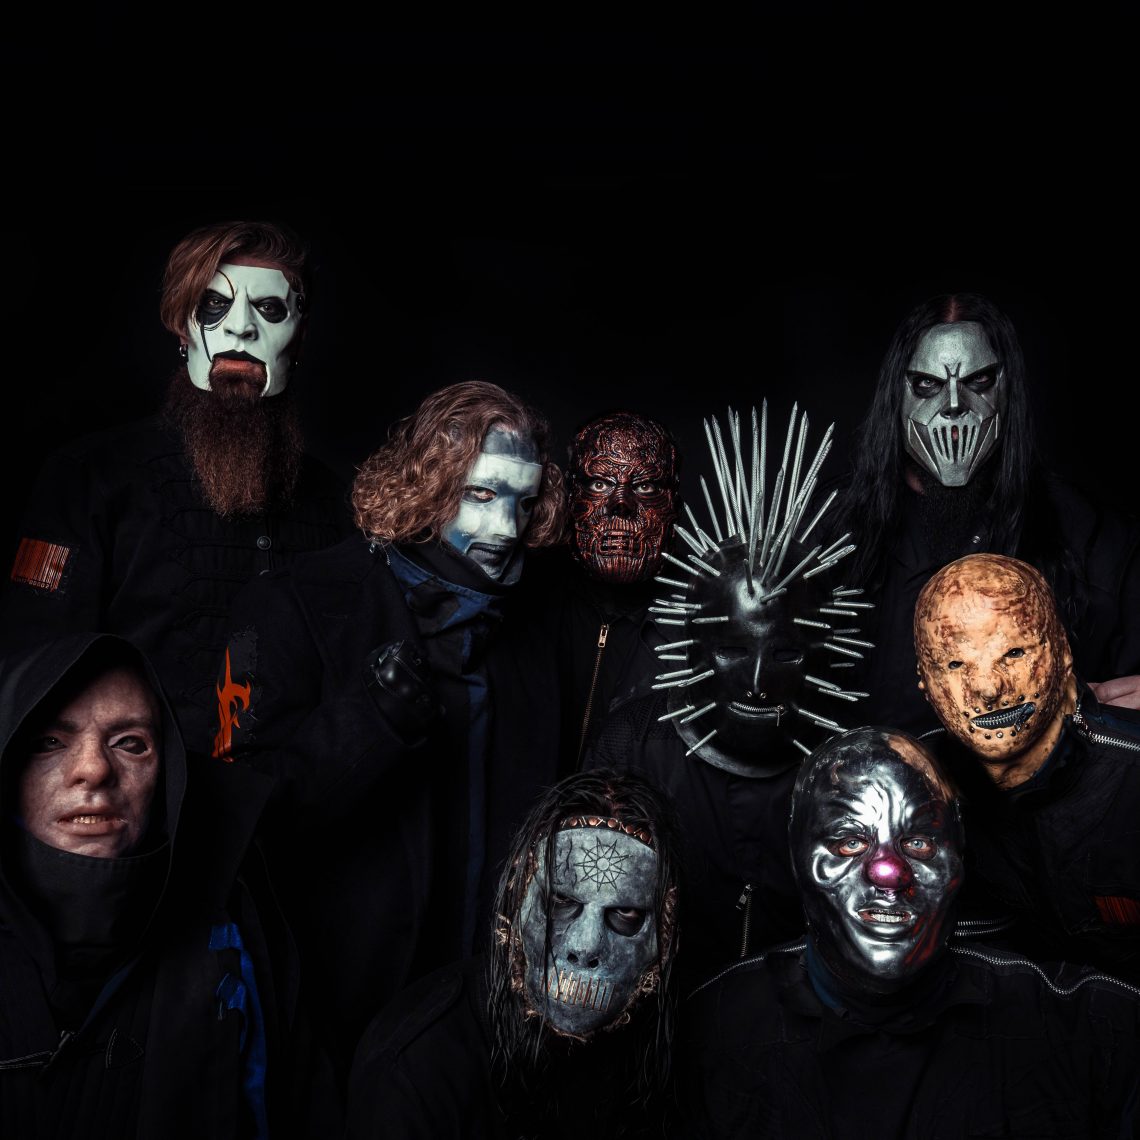 SLIPKNOT share new song, ‘Solway Firth’